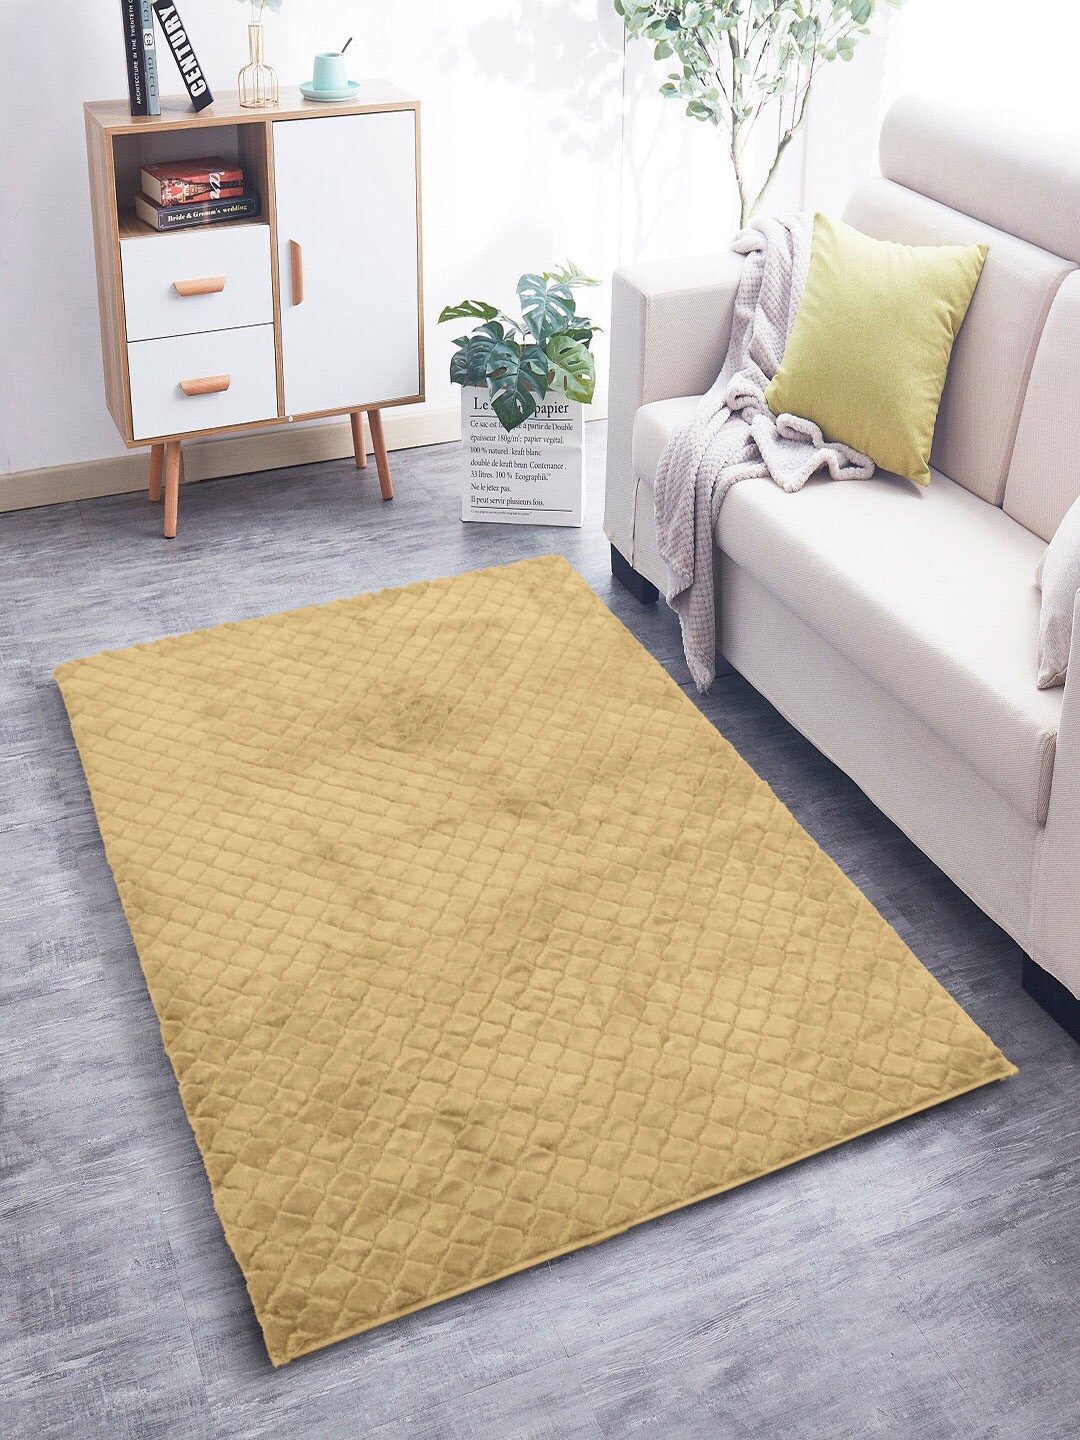 LUXEHOME INTERNATIONAL Golden Solid Antiskid Austria Carpets Price in India